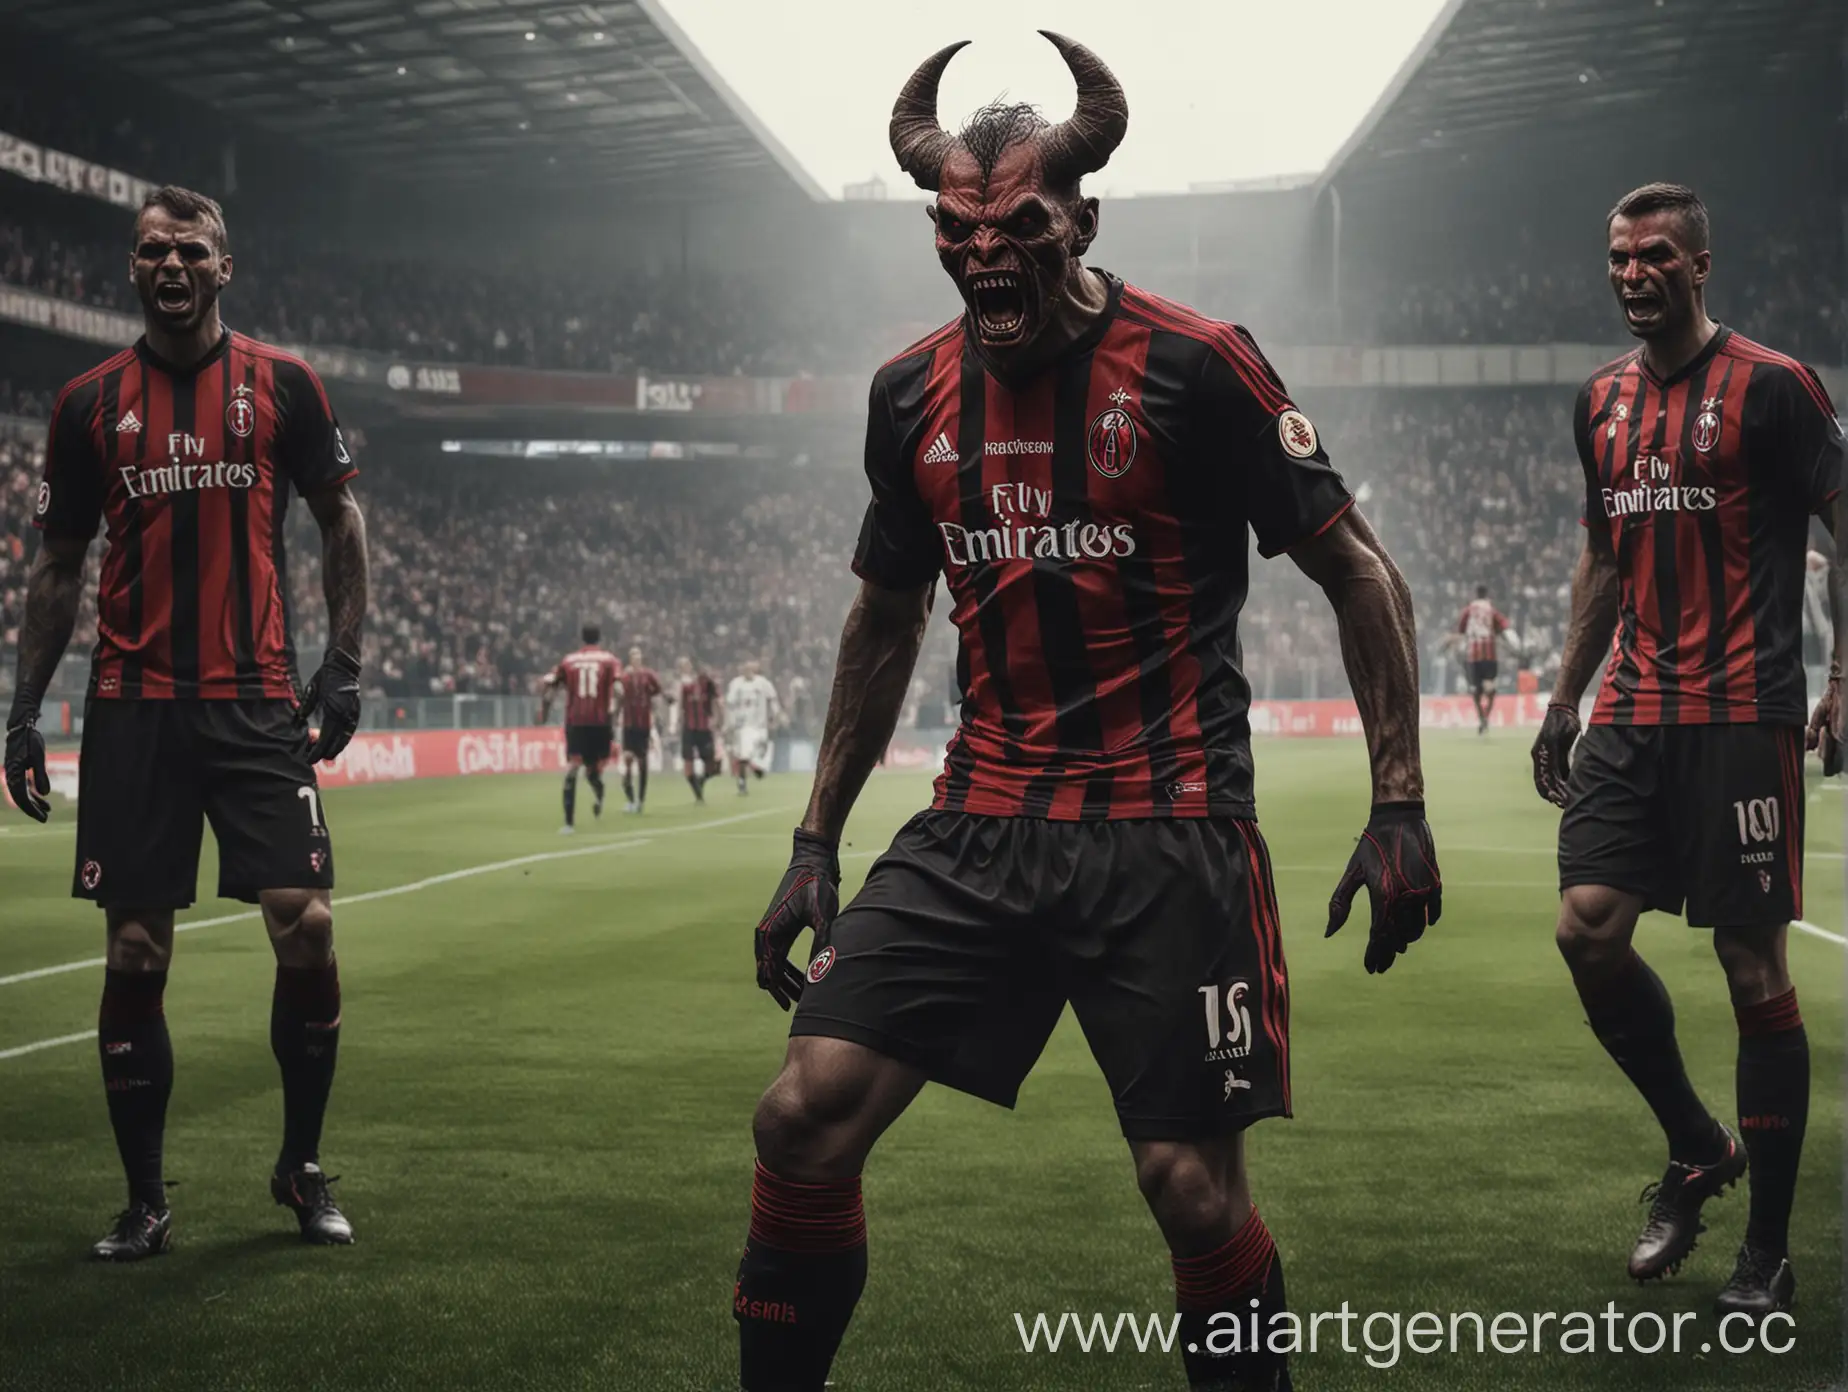 Sinister-Demon-Milan-Football-Club-Haunted-by-Darkness